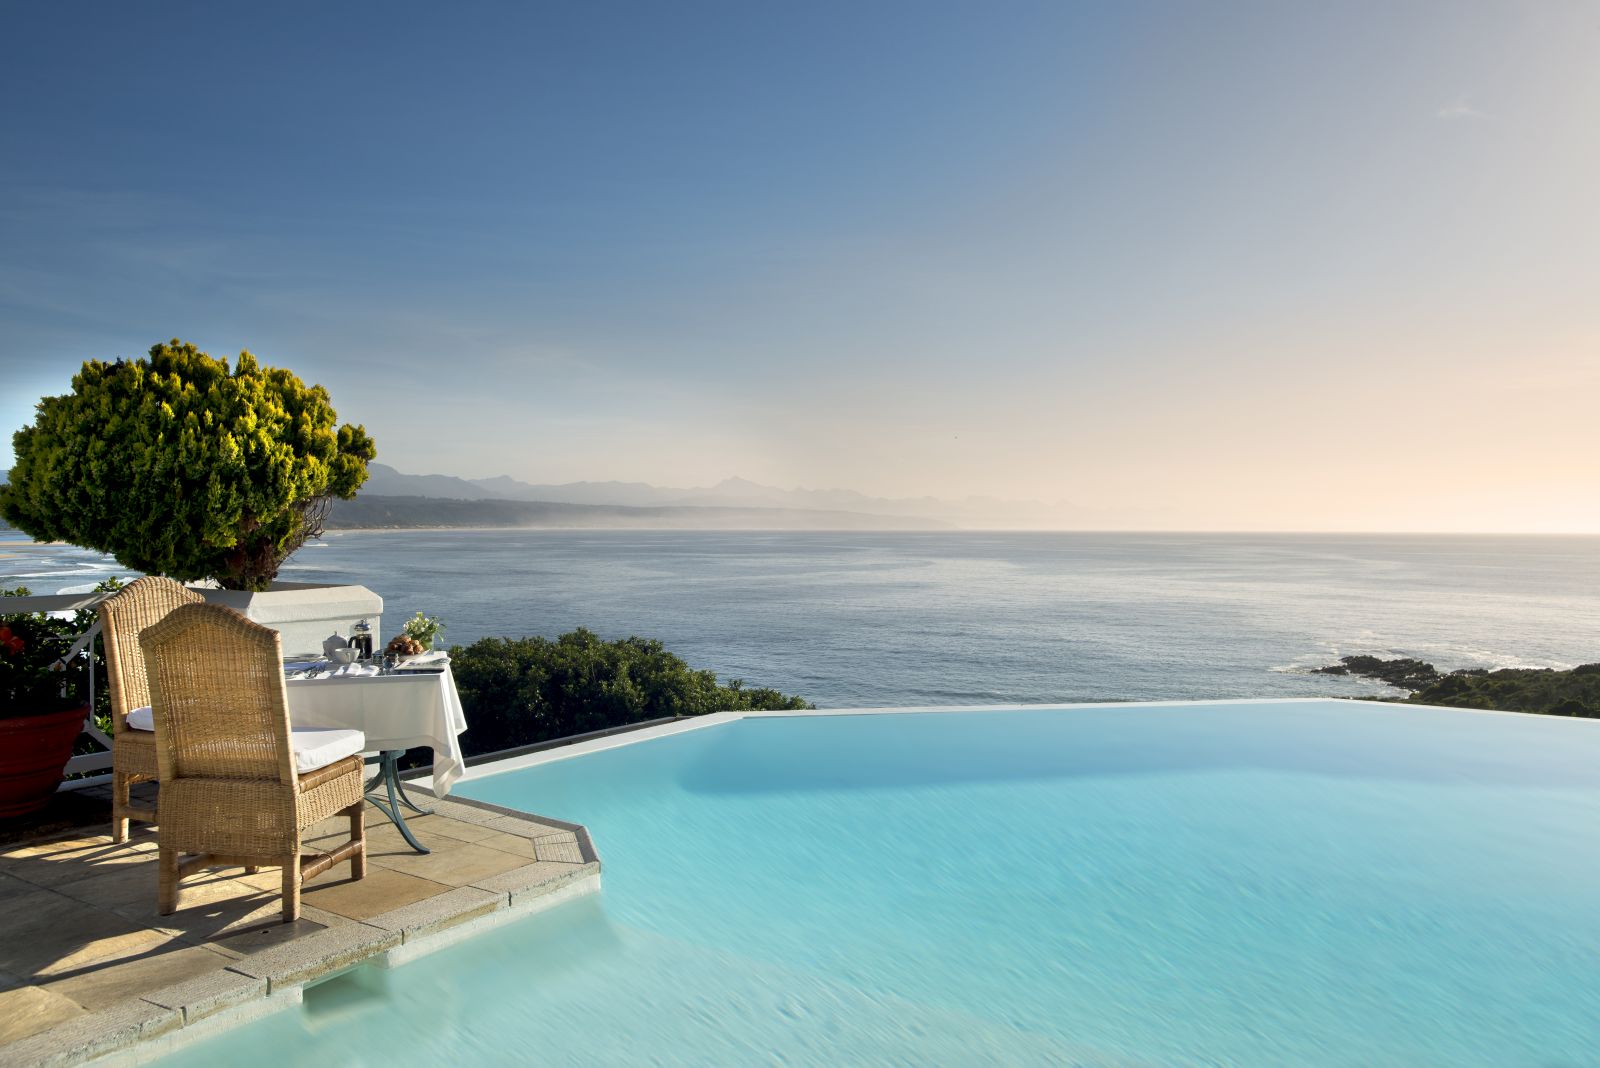 Main pool at The Plettenberg in South Africa